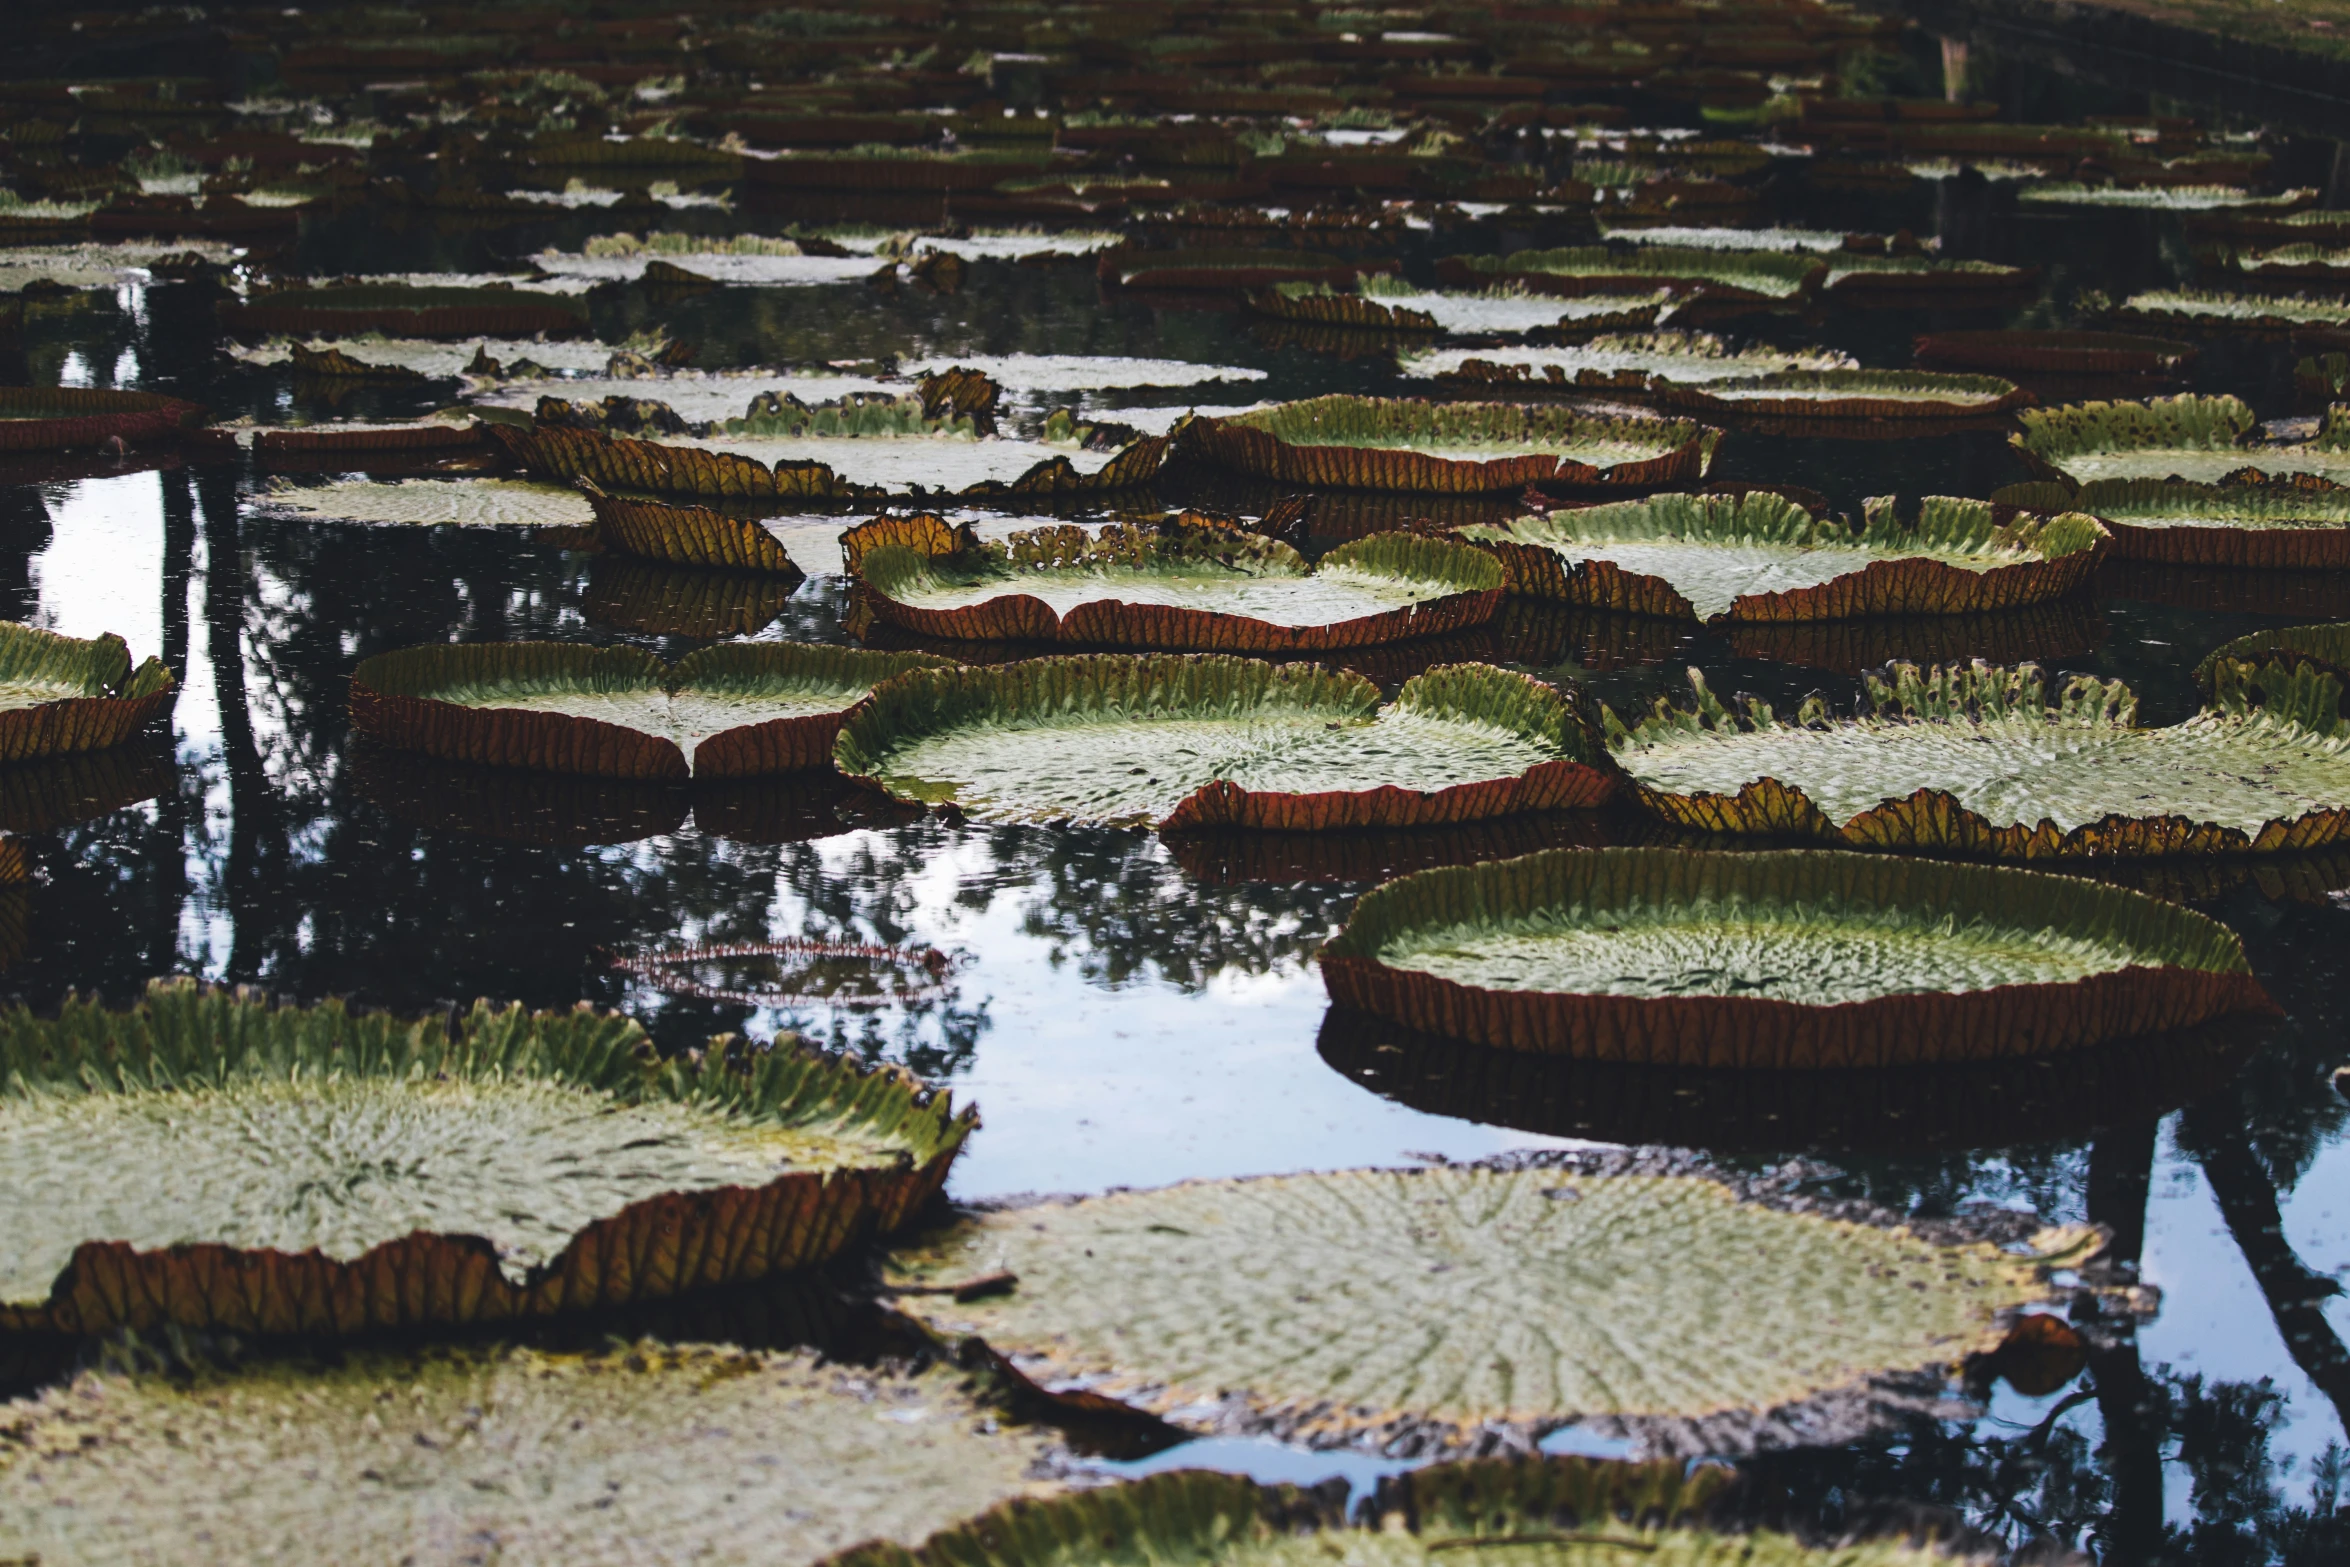 several water lilies floating in a pond filled with greenery